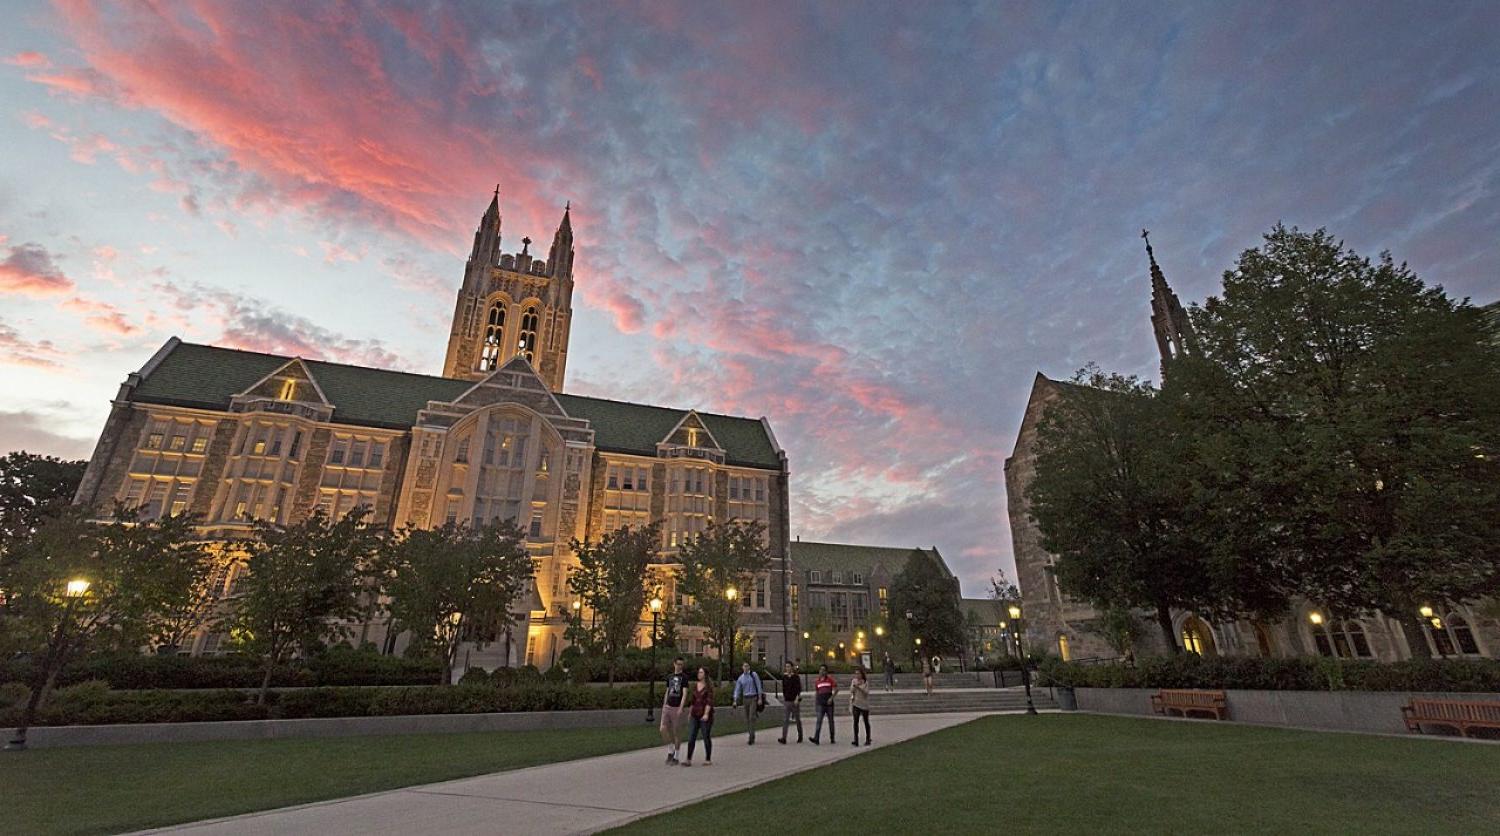 Gasson hall at susnet